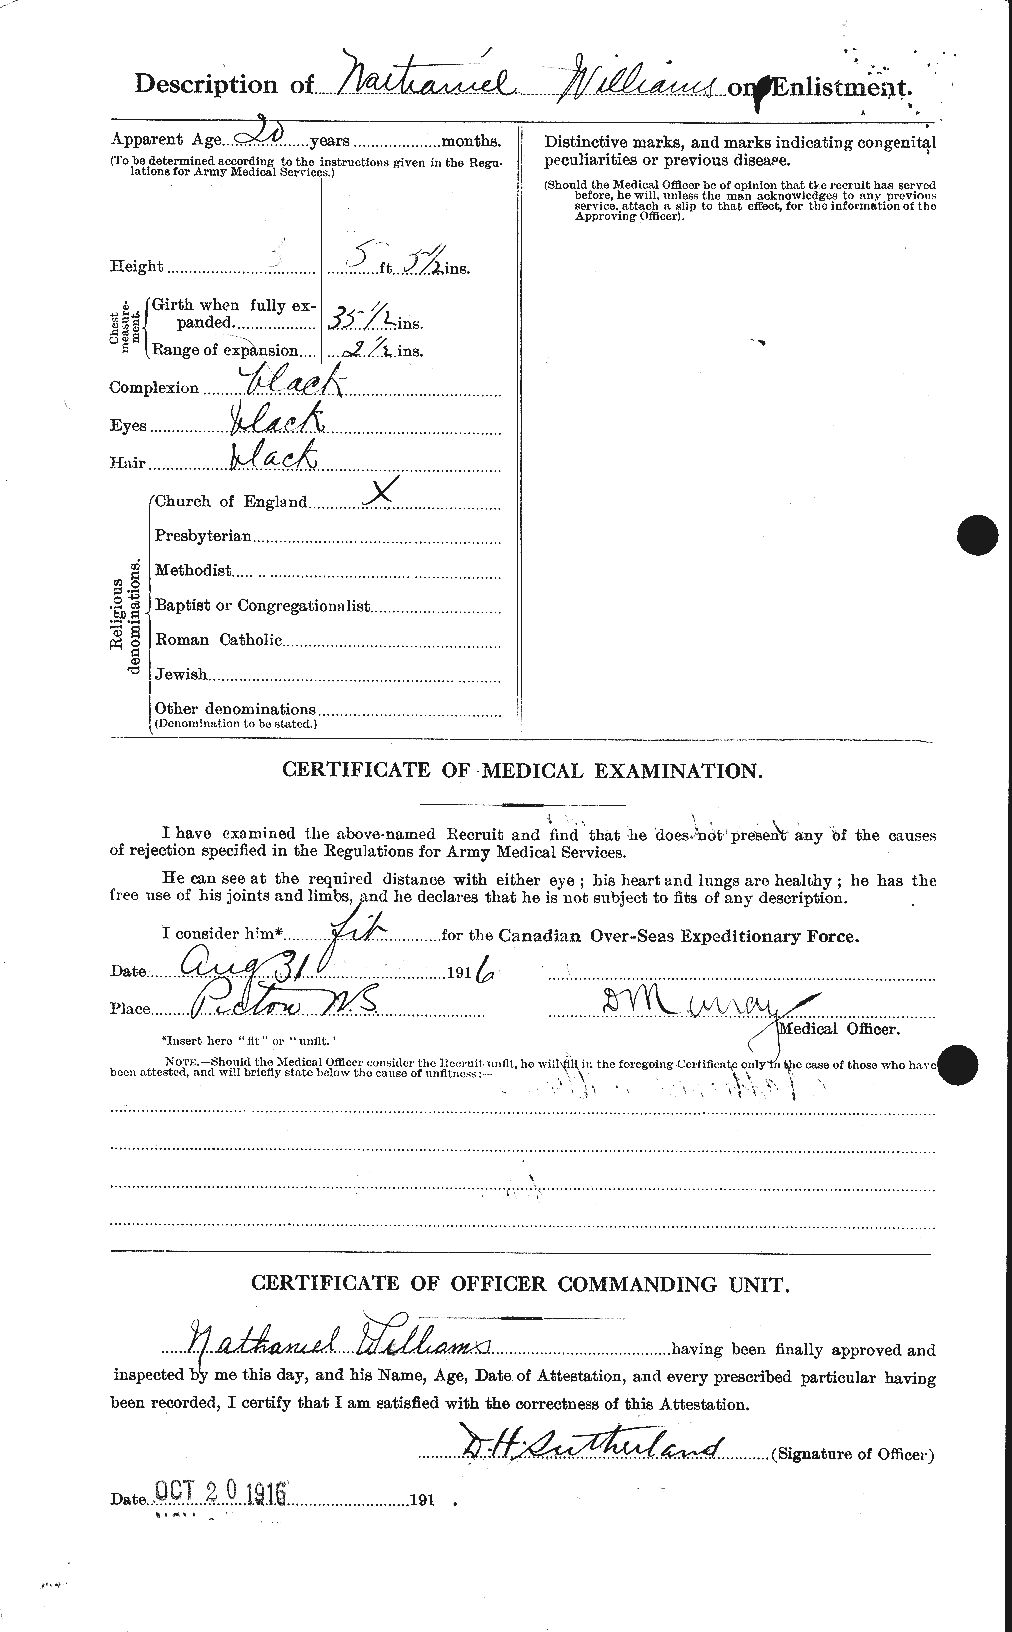 Personnel Records of the First World War - CEF 675543b